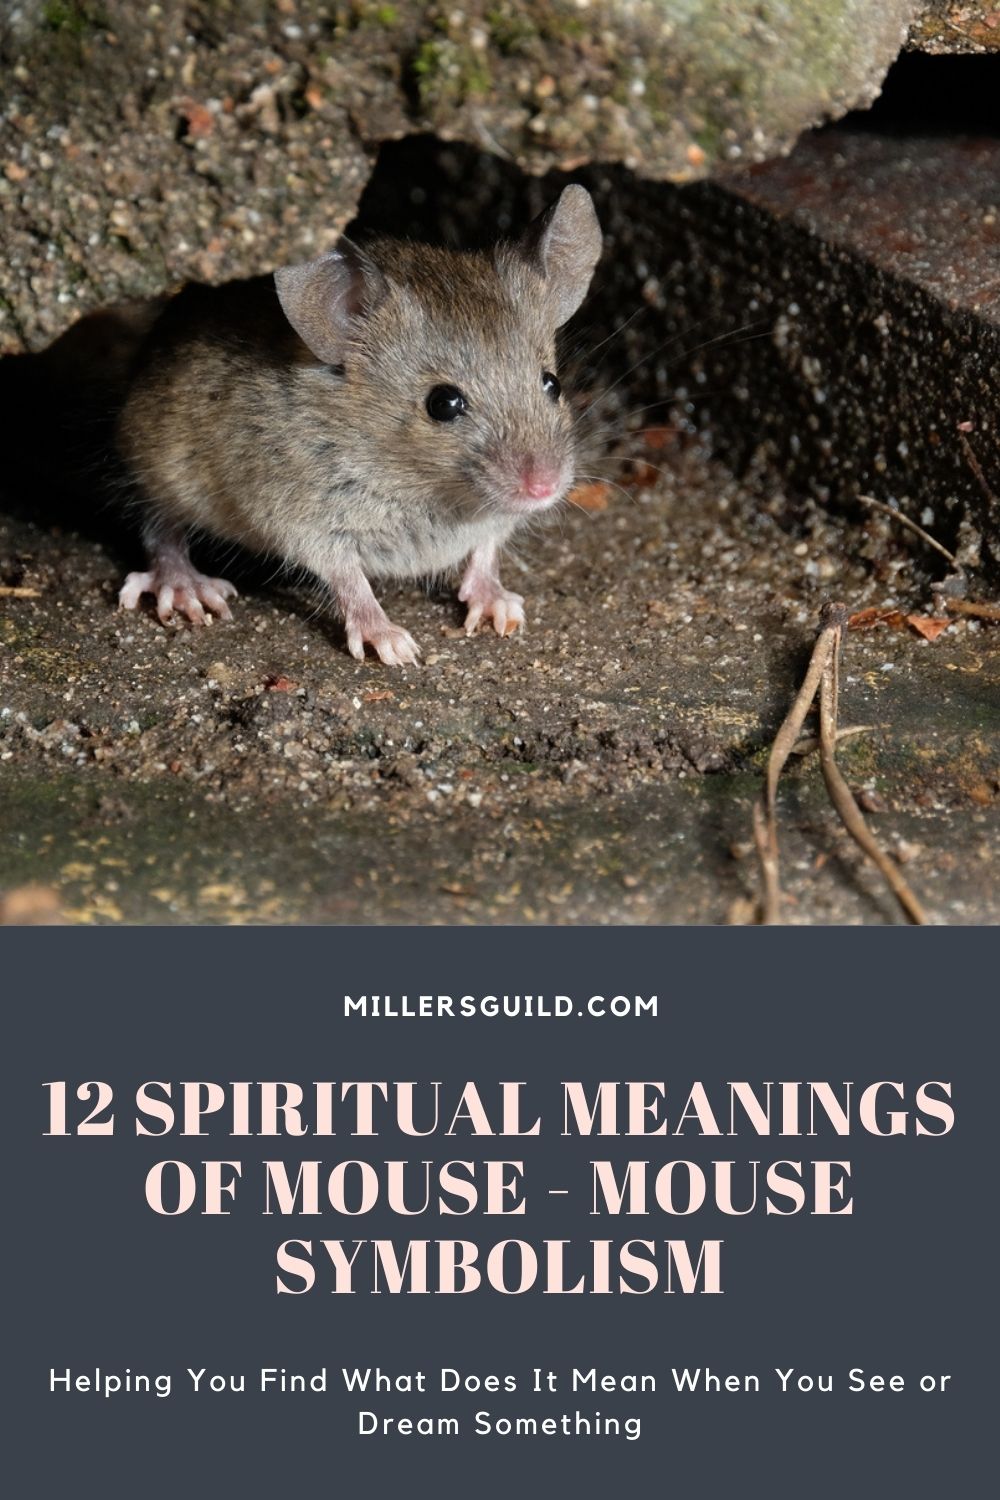 12 Spiritual Meanings of Mouse - Mouse Symbolism 1